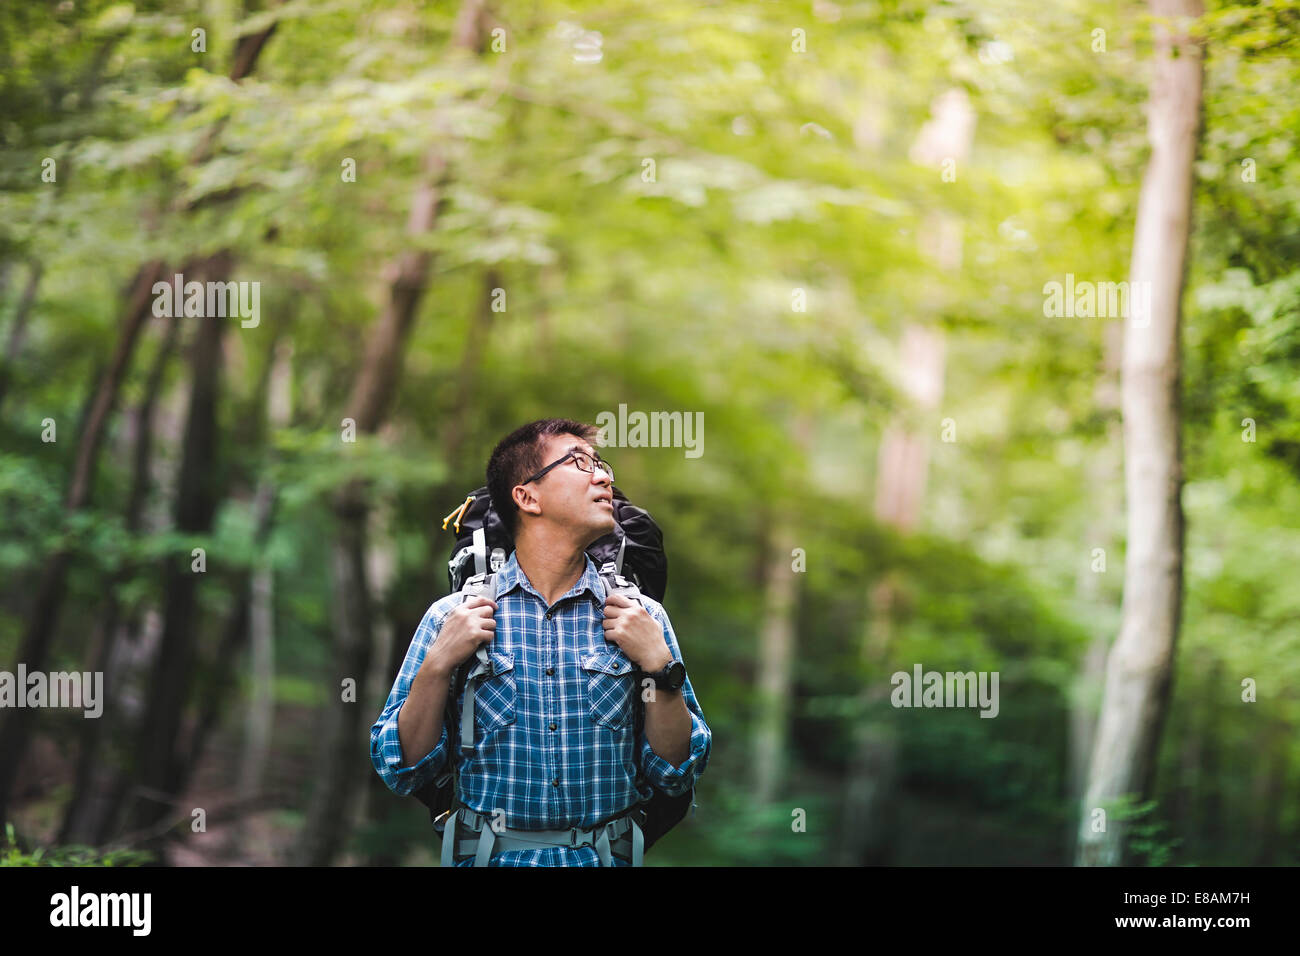 Hiker with backpack in forest Stock Photo